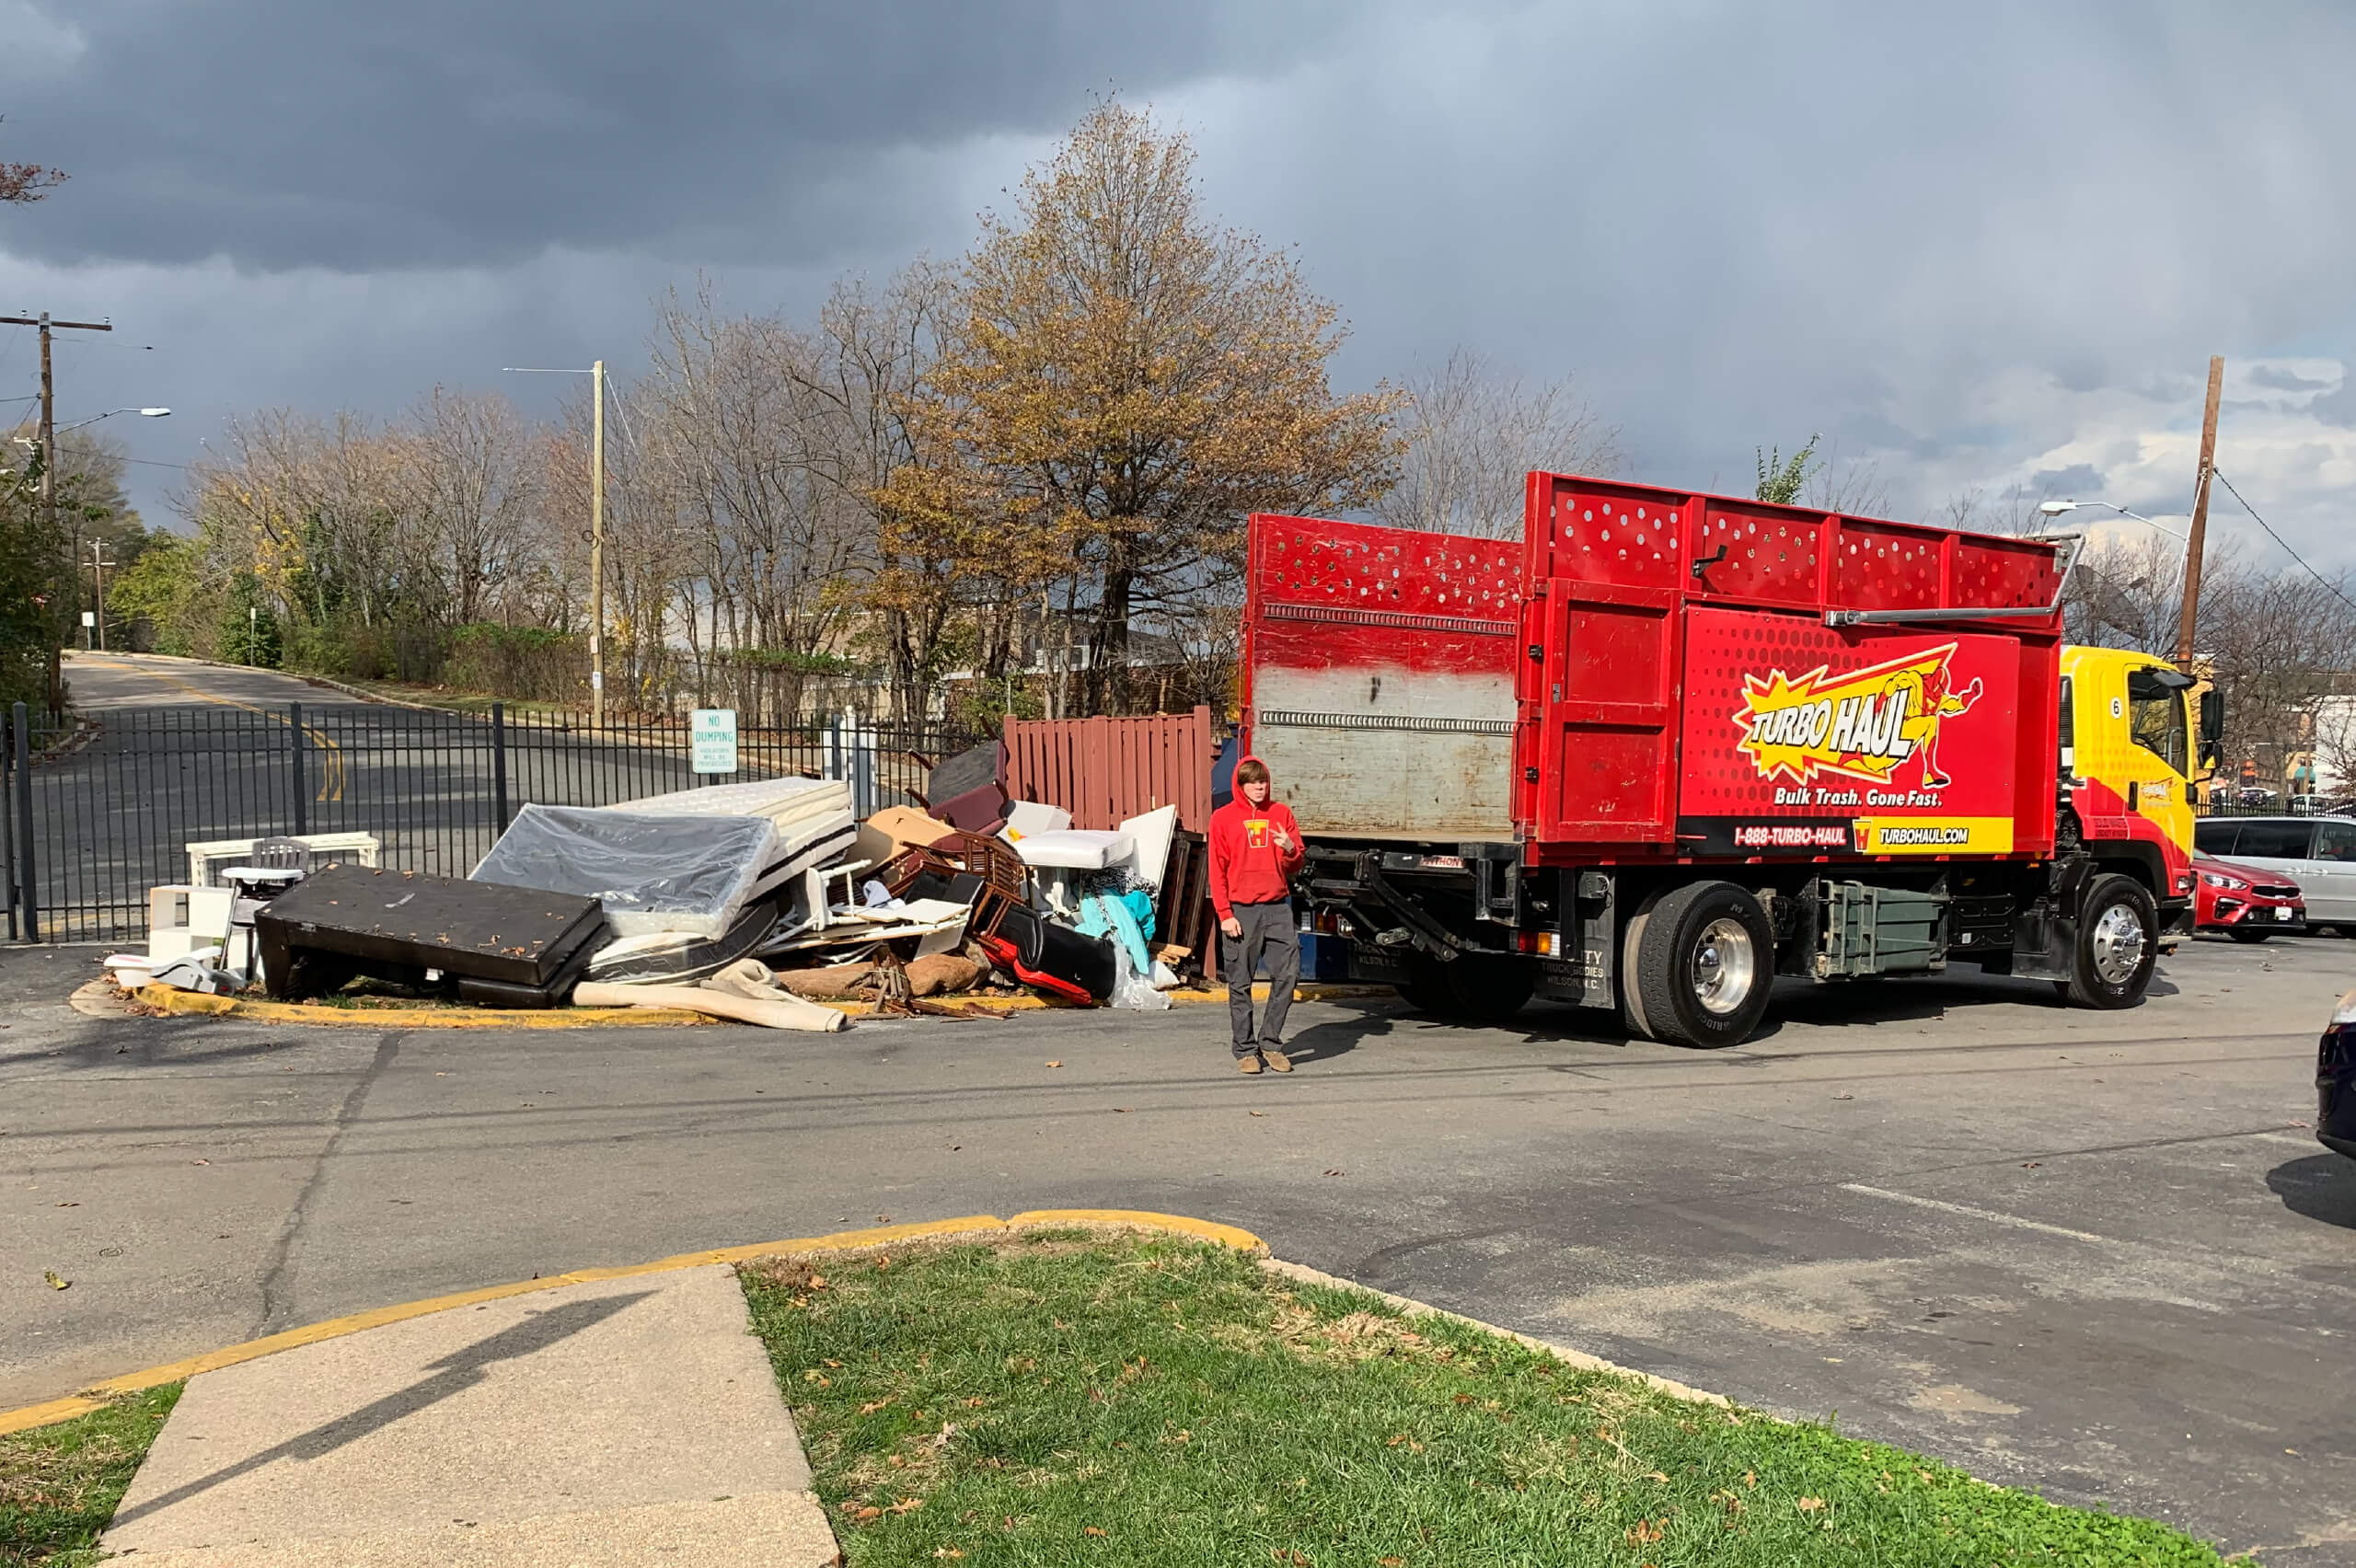 Commercial junk removal specialist gives peace sign in Upper Marlboro, MD